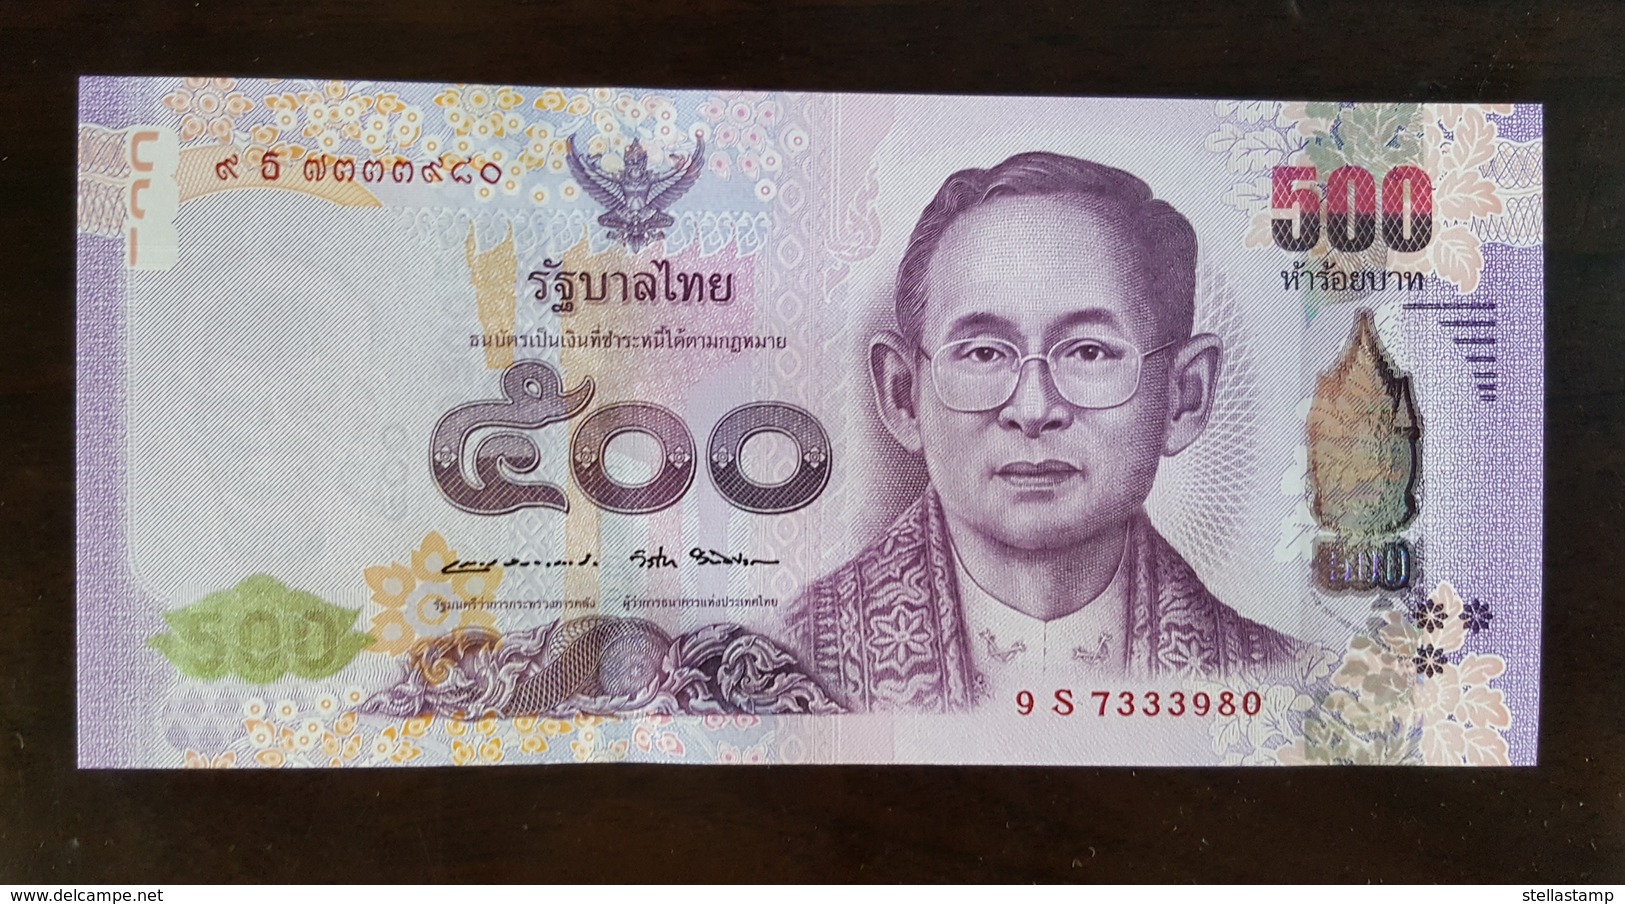 Thailand Banknote 500 Baht 84th Birthday Queen Sirikit - Replacement (9S) - Thailand